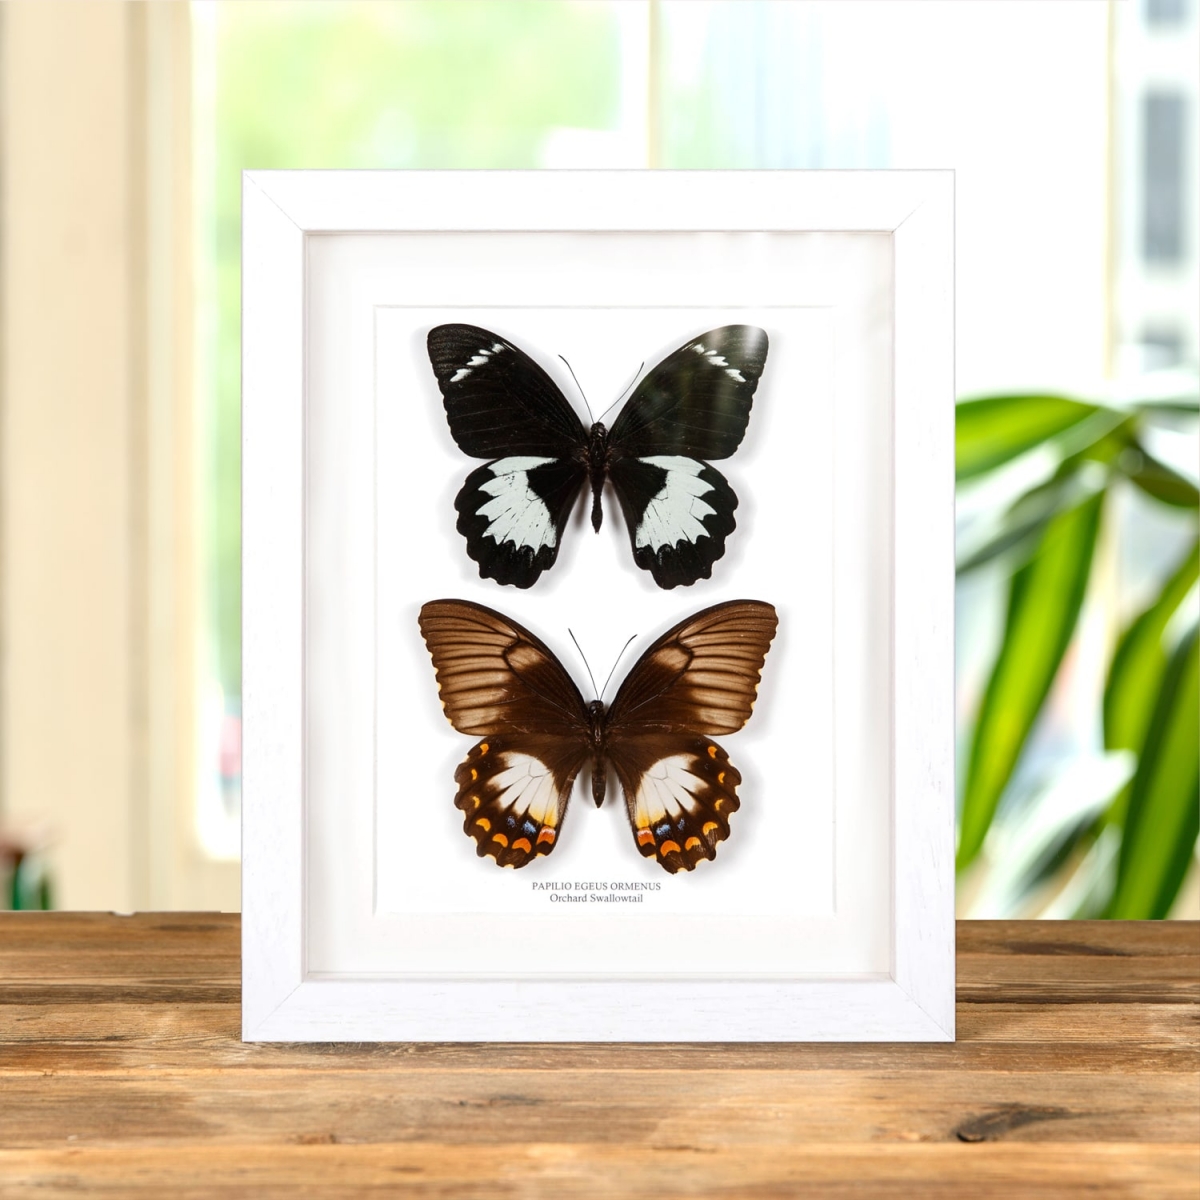 Orchard Swallowtail Butterfly Male & Female In Box Frame (Papilio aegeus ormenus)